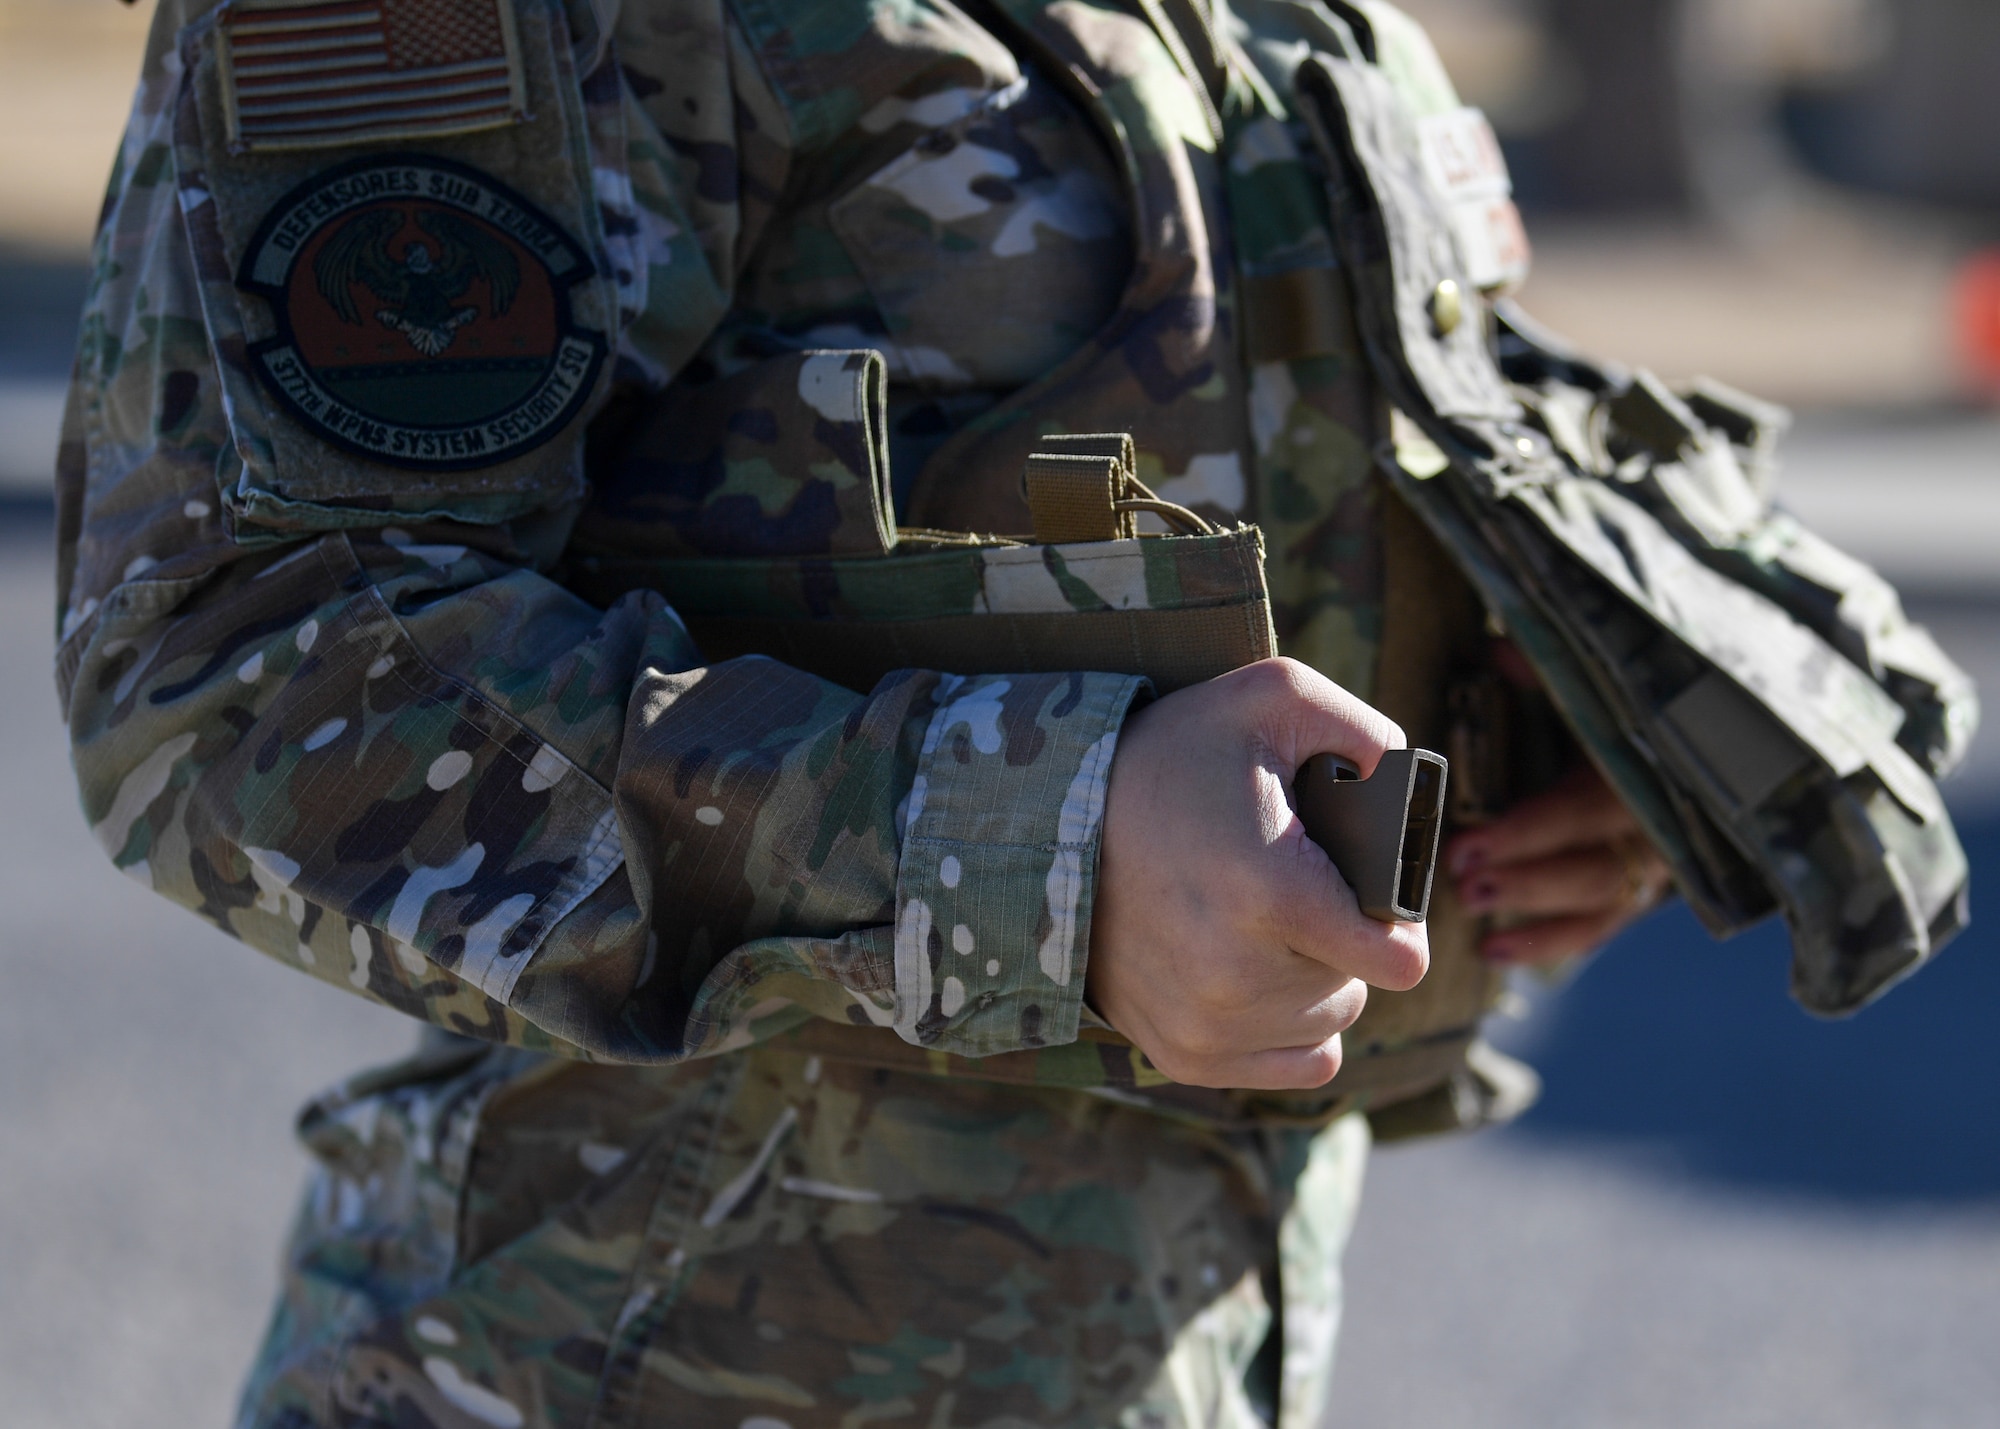 Senior Airman Kiah C. Cook, 377th Security Forces Group defender, donns her body armor at Kirtland Air Force Base, N.M., Feb. 4, 2021. One of the features on the new female body armor is a snap buckle instead of the original velcro, which is used on the standard vest. The adjustable back corset allows the wearer to tighten the fit, making it more secure.